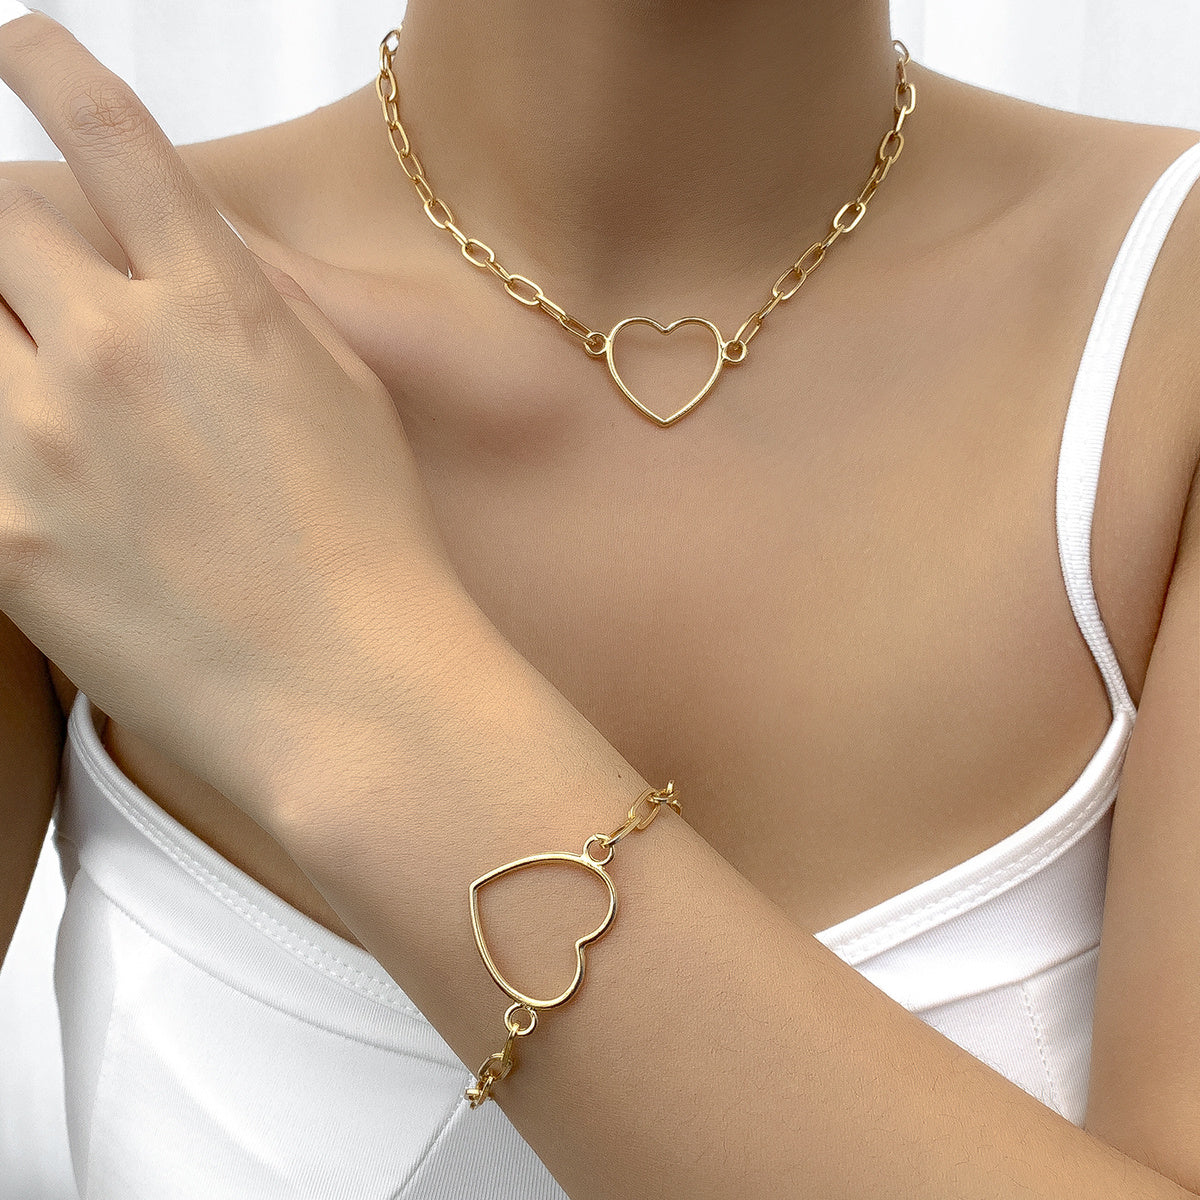 Gorgeous Heart-Shaped Hollow Chain - A Stylish Accessory for Your Neck!